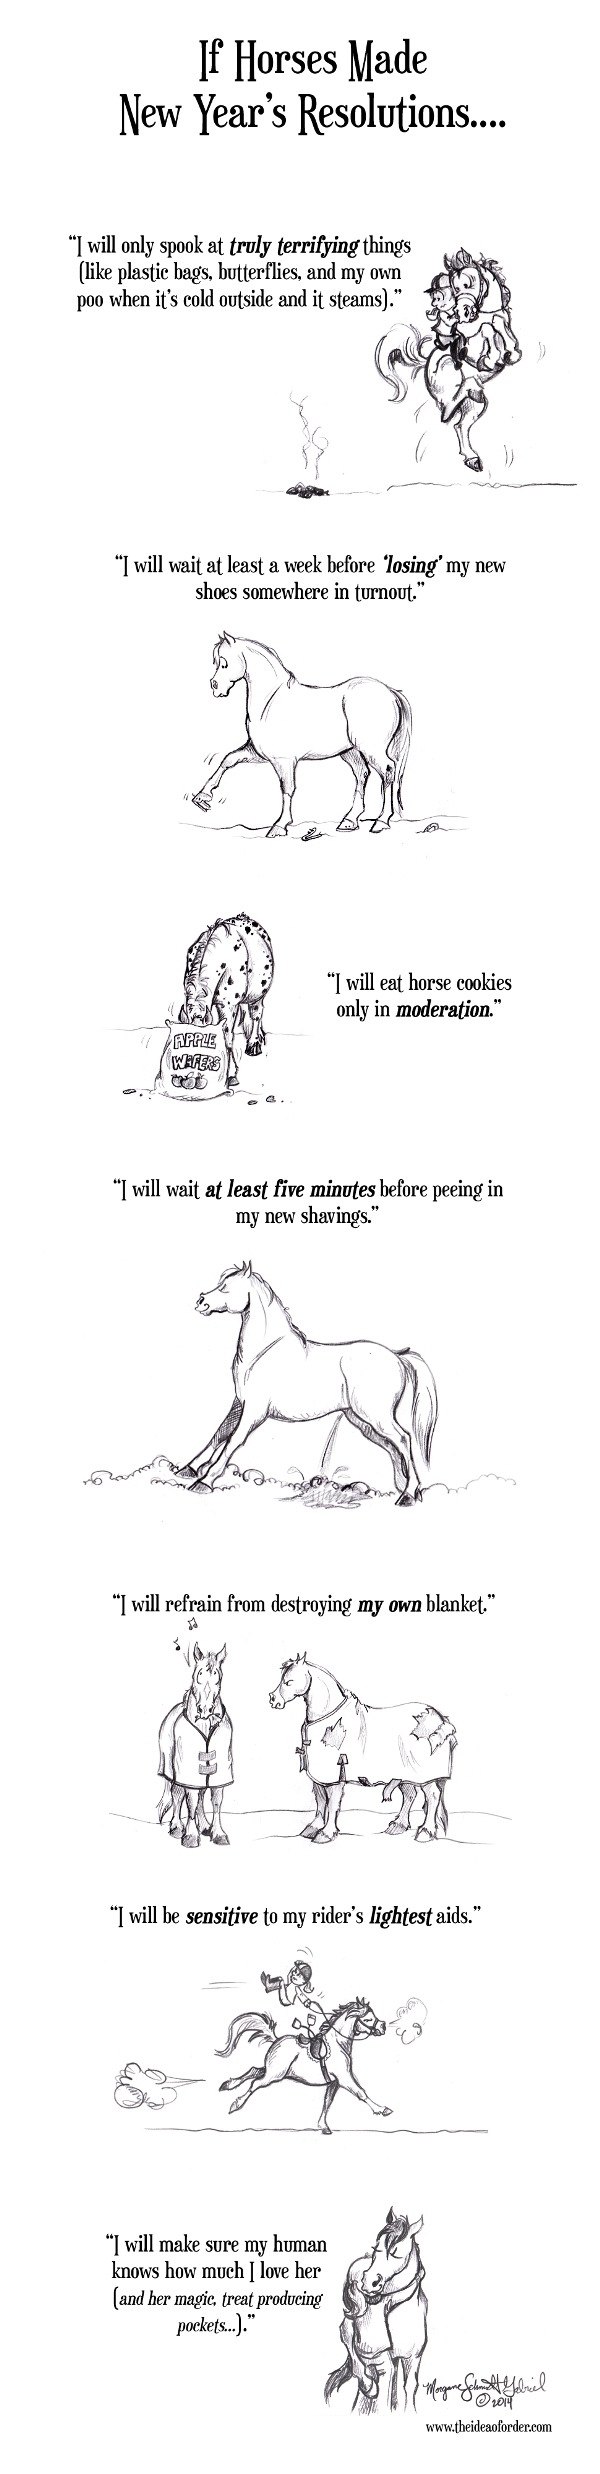 If Horses made New Years Resolutions from The Idea of Order